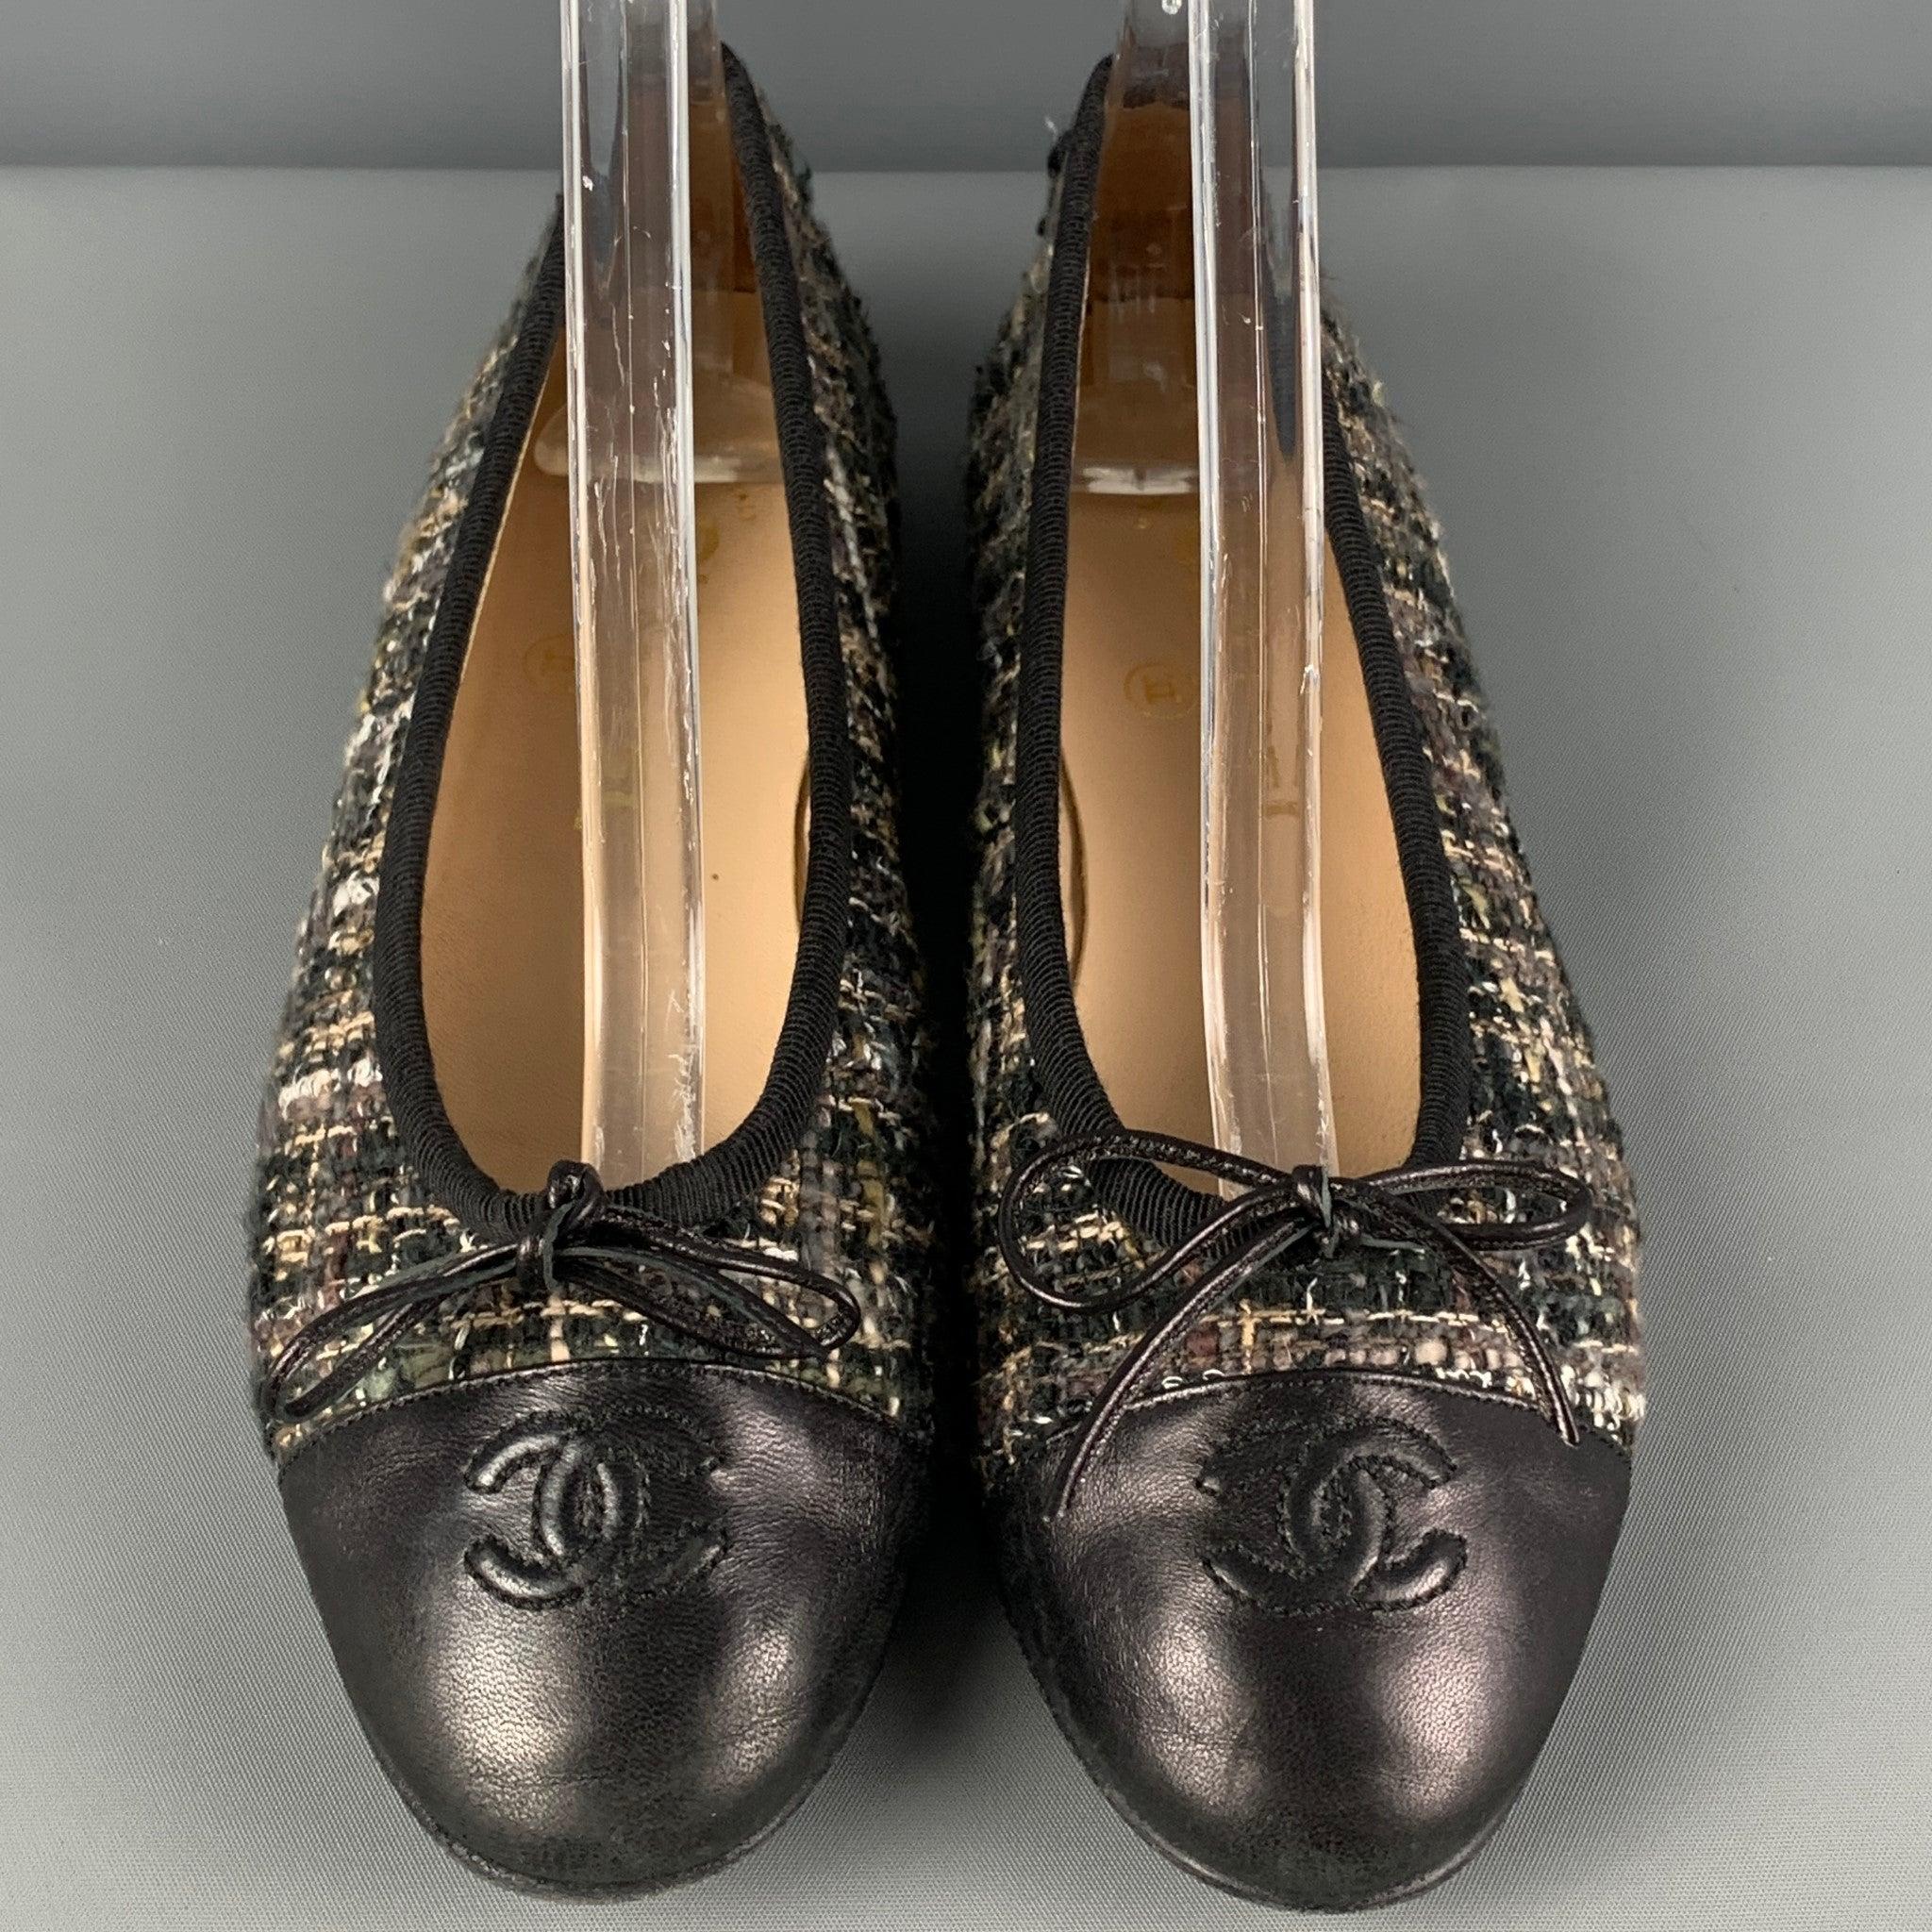 CHANEL flats comes in a black & brown boucle material featuring a black leather toe, logo design, and a leather bow detail. Made in Italy.
Very Good
Pre-Owned Condition. 

Marked:   36.5 

Measurements: 
  Outsole: 9.5 inches  x 3 inches 
  
  
